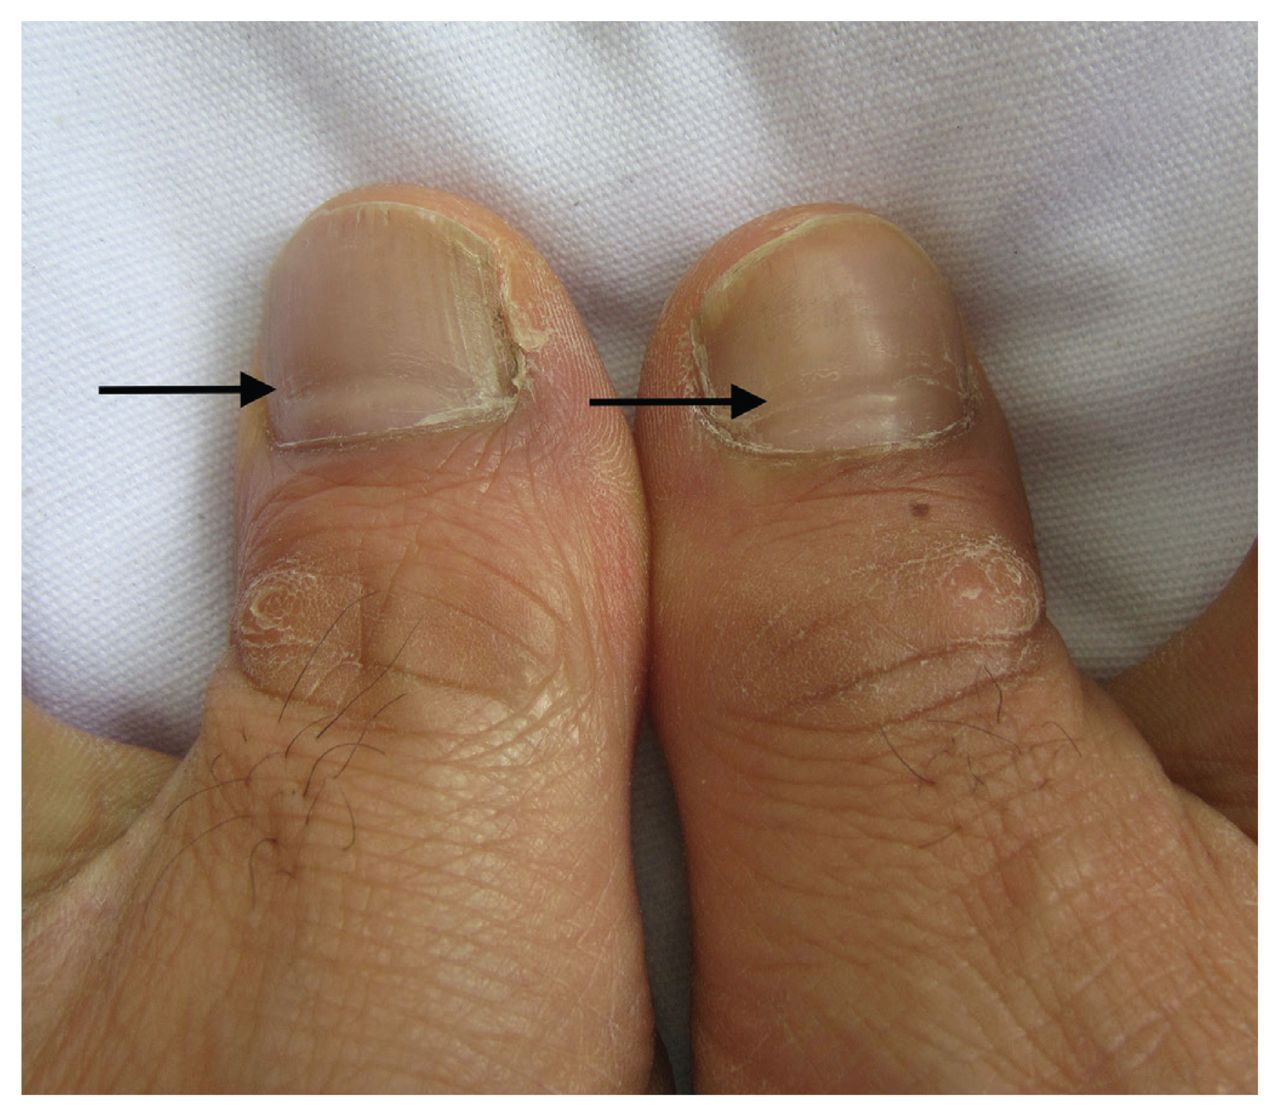 What is a thick white verticalline on my big toe and thumb nail? - Quora